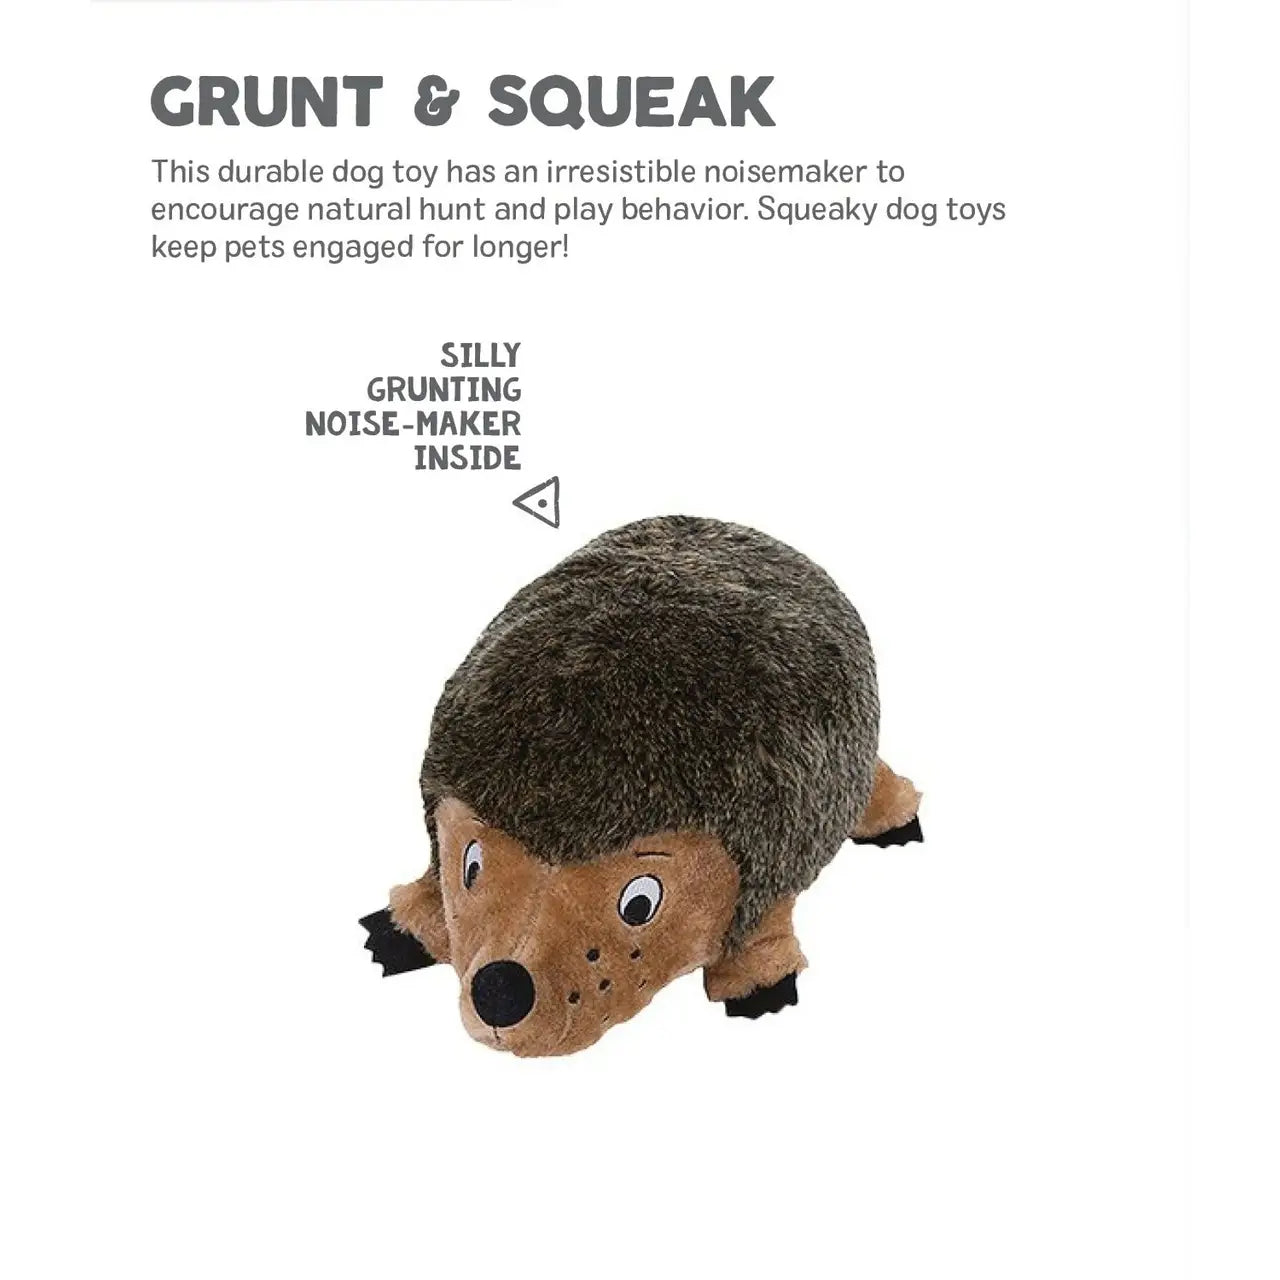 Grunt & Squeak This durable dog toy has an irresistible noisemaker to encourage natural hunt and play behavior. Squeaky dog toys keep pets engaged for longer.